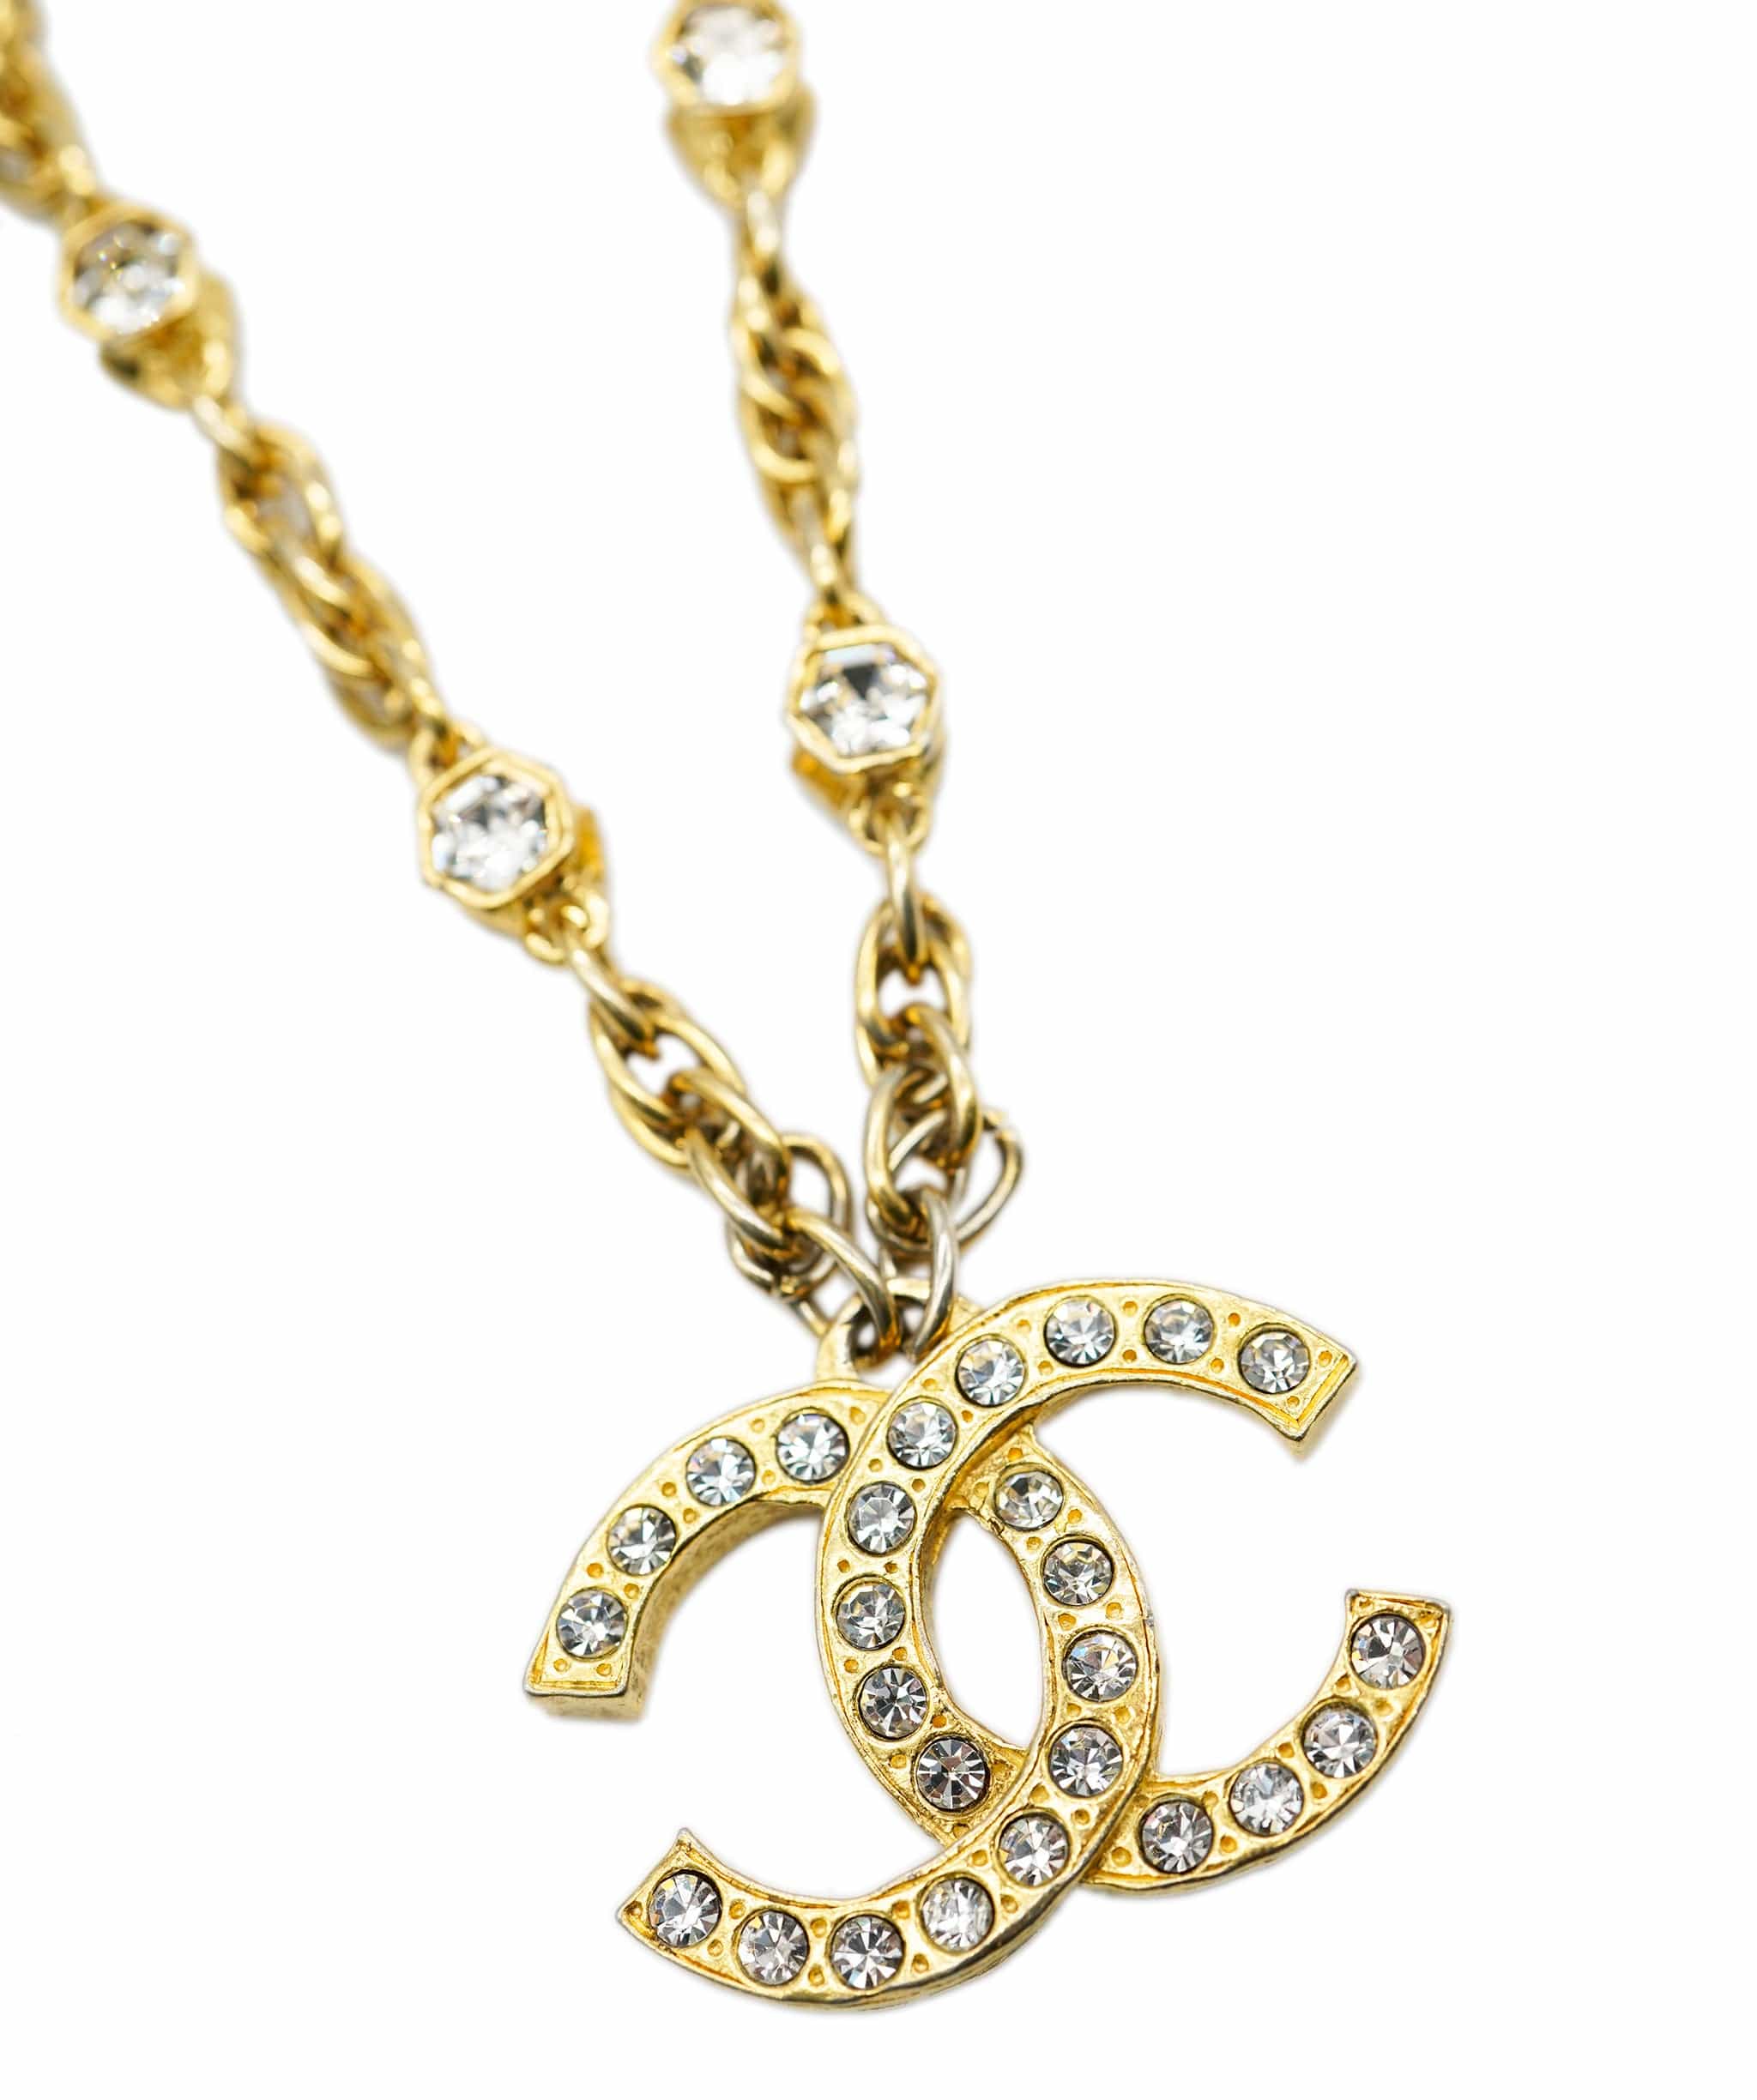 Chanel Chanel crystal CC necklace gold ASC1767